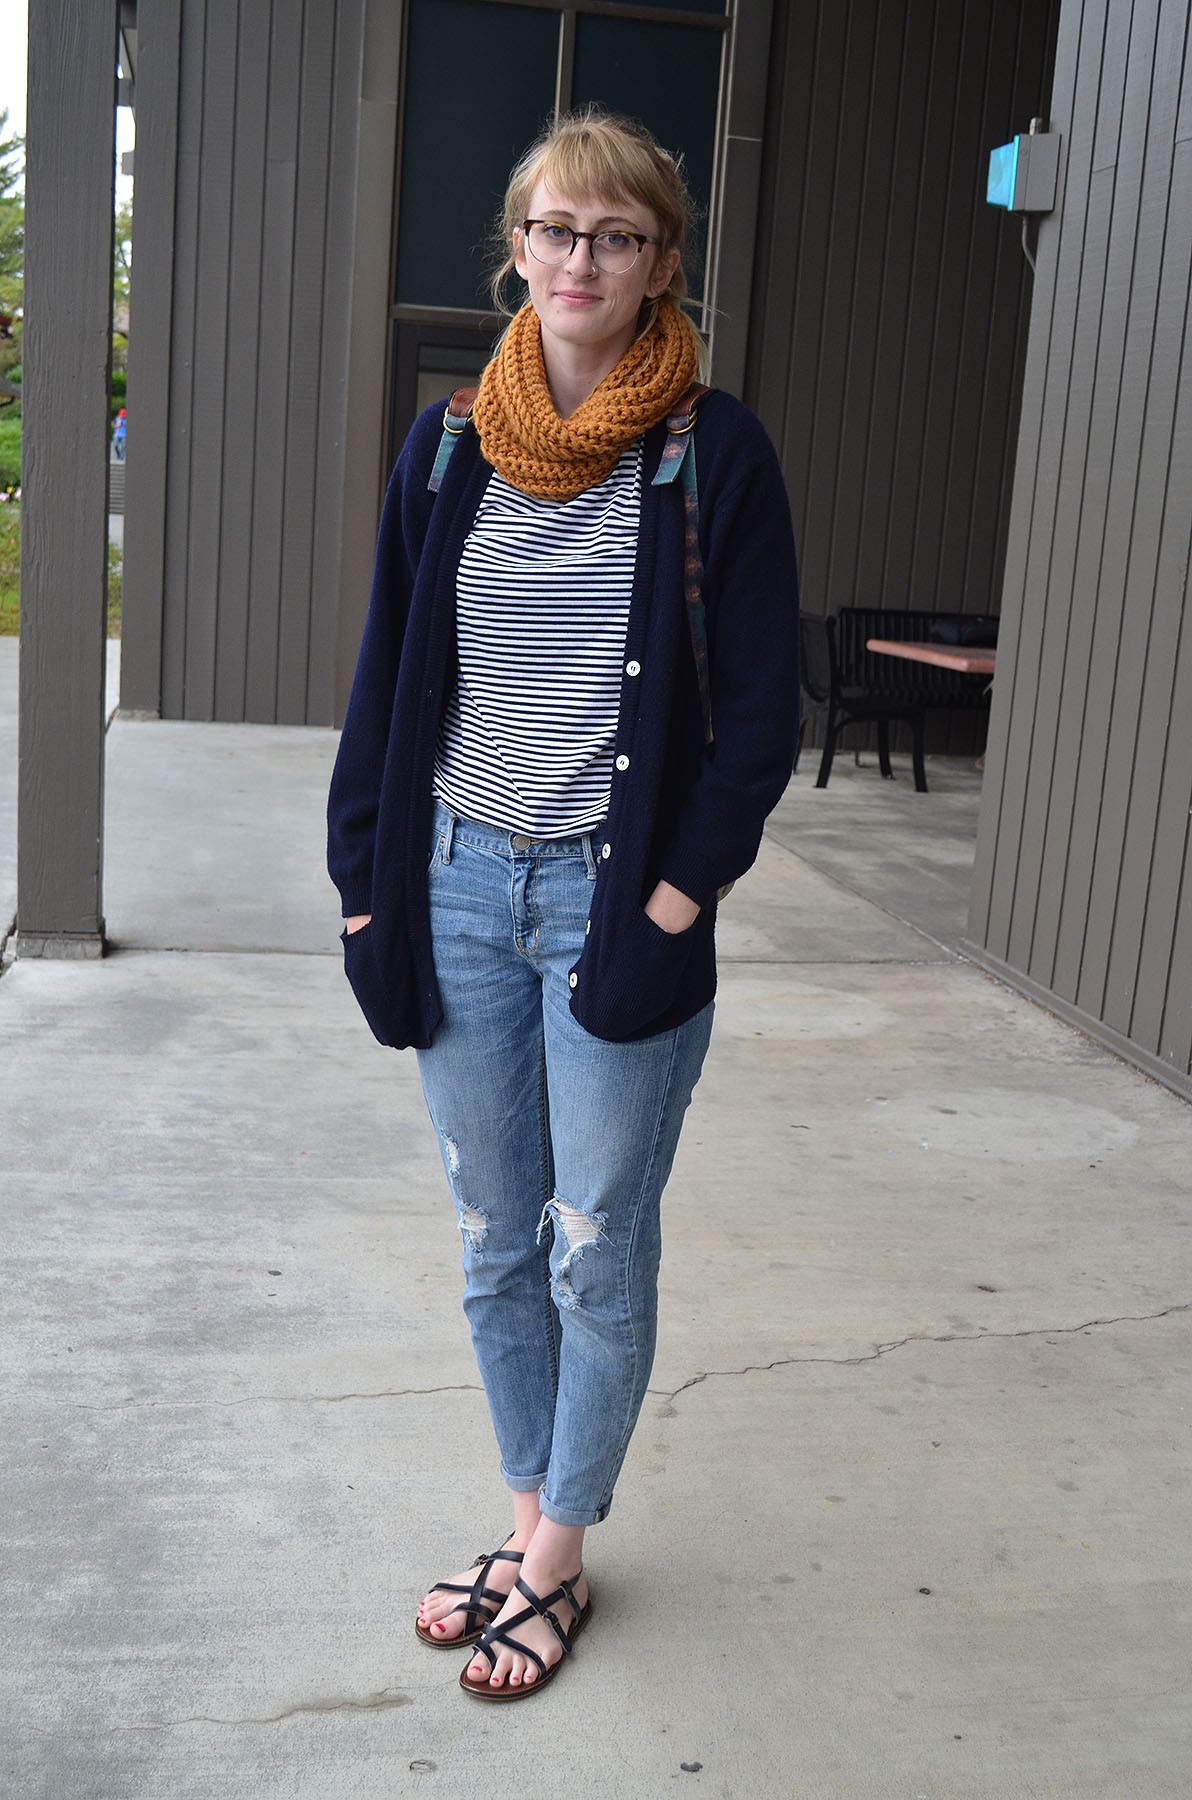 Billie, a senior art student from Salinas, says Humboldt's weather is "amazing." She's ready for it in a Paris-meets-redwoods, thrifted, handmade scarf, sandals and jeans from a free pile. - PHOTO BY SHARON RUCHTE